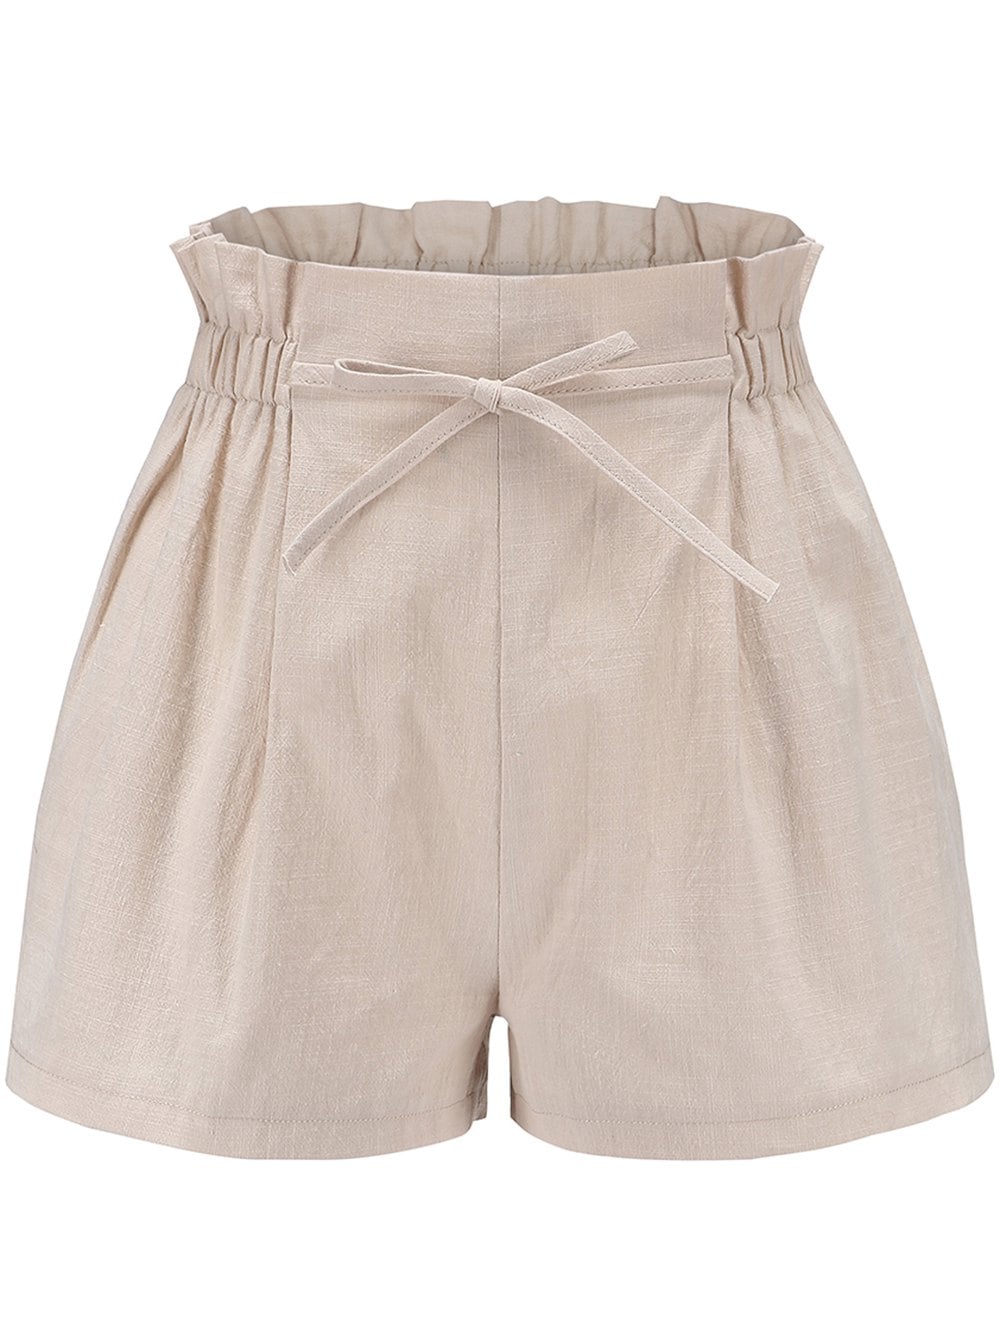 Womens Elastic Waist Casual Comfy Cotton Linen Beach Shorts with Drawstring